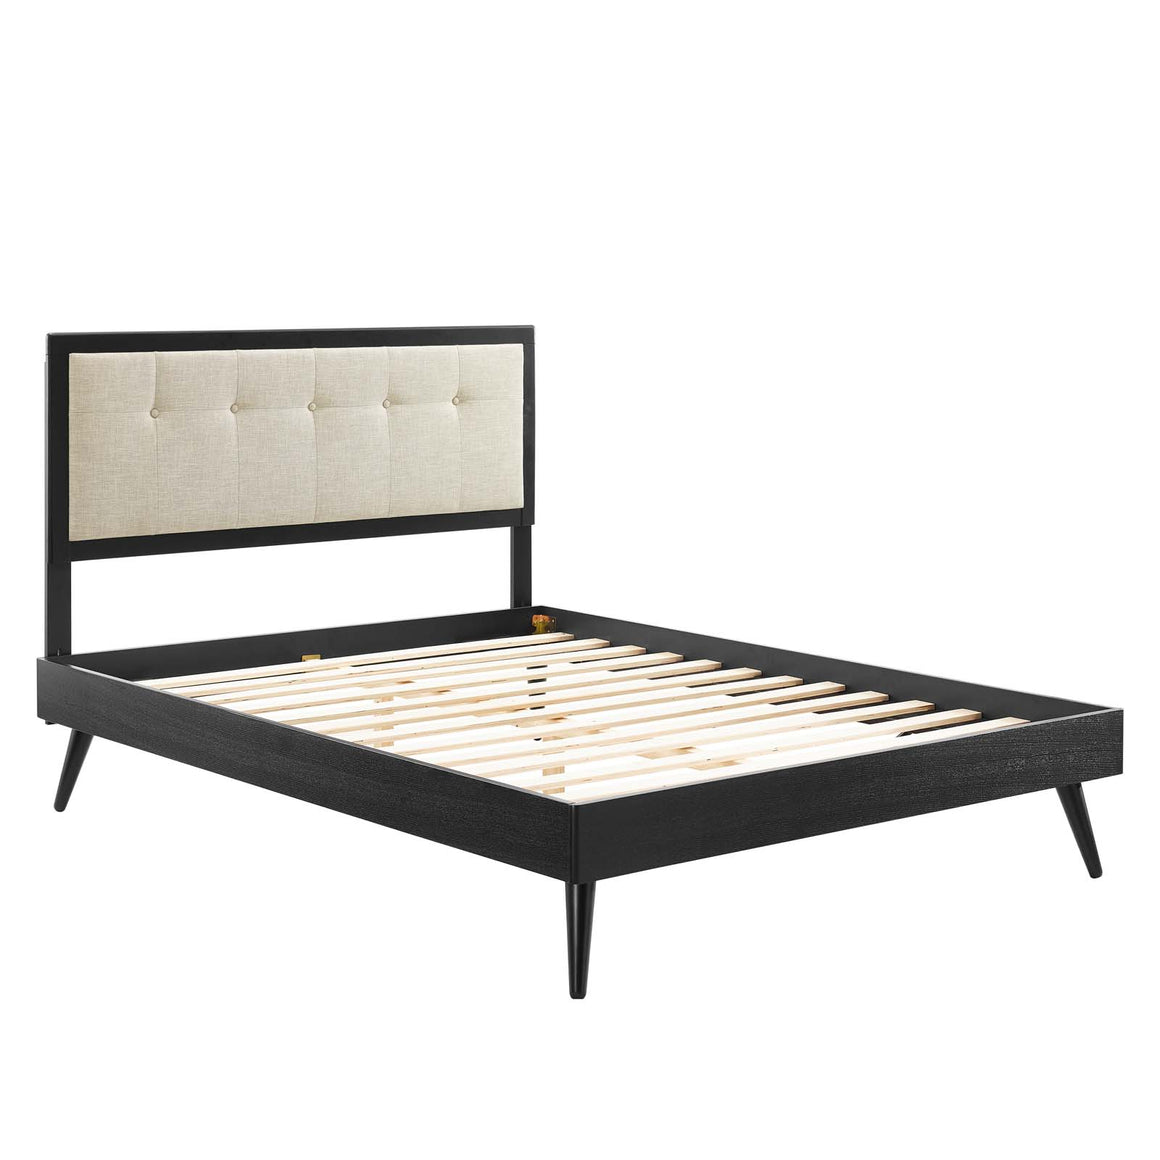 Willow Wood Platform Bed With Splayed Legs